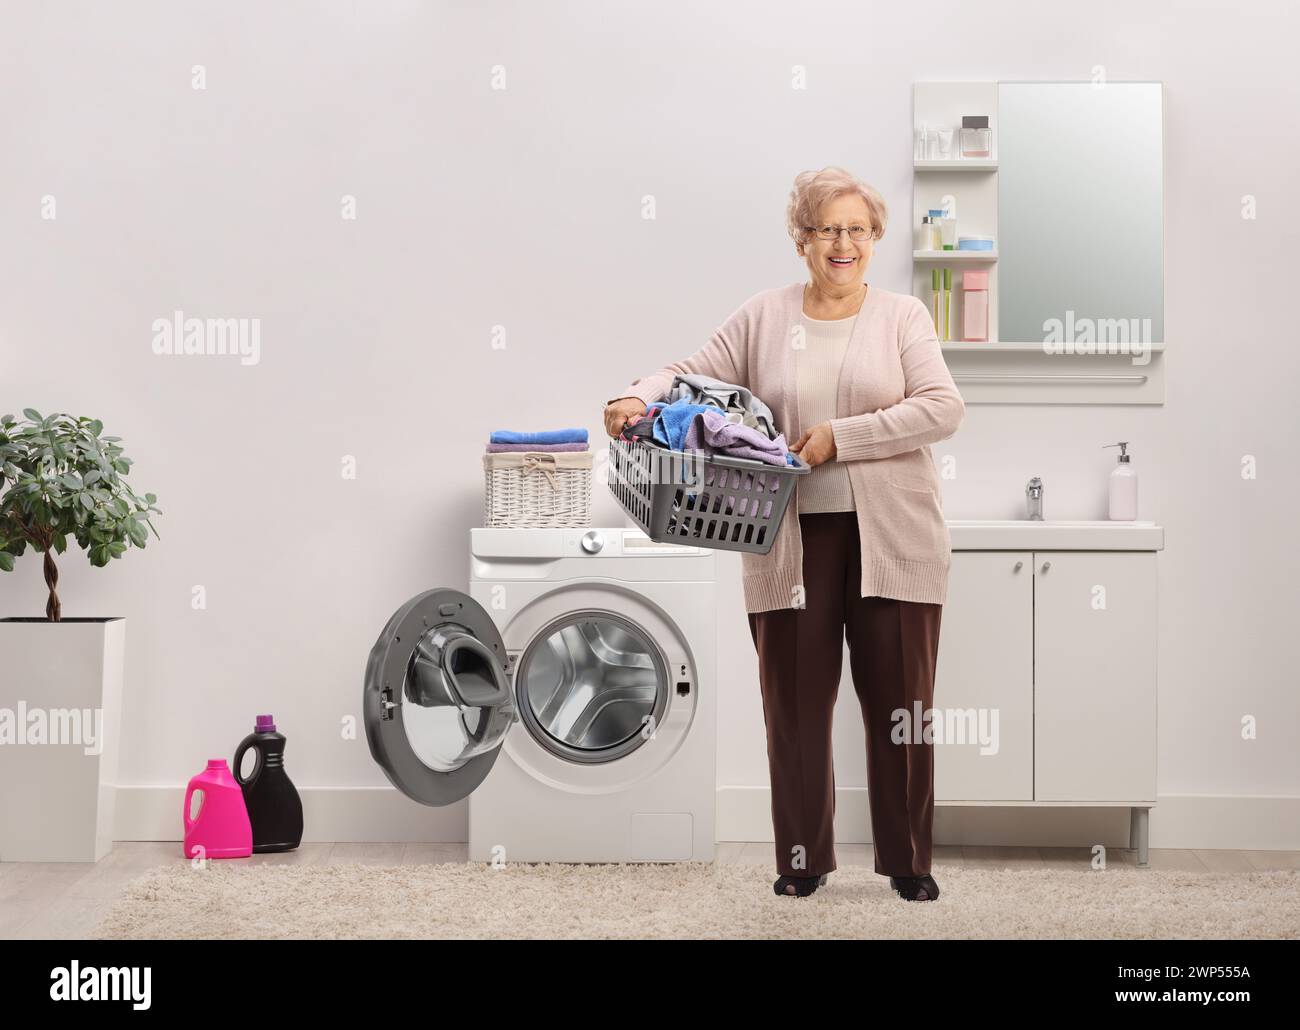 Full length portrait of an elderly lady holding a laundry basket with clothes inside a bathroom Stock Photo